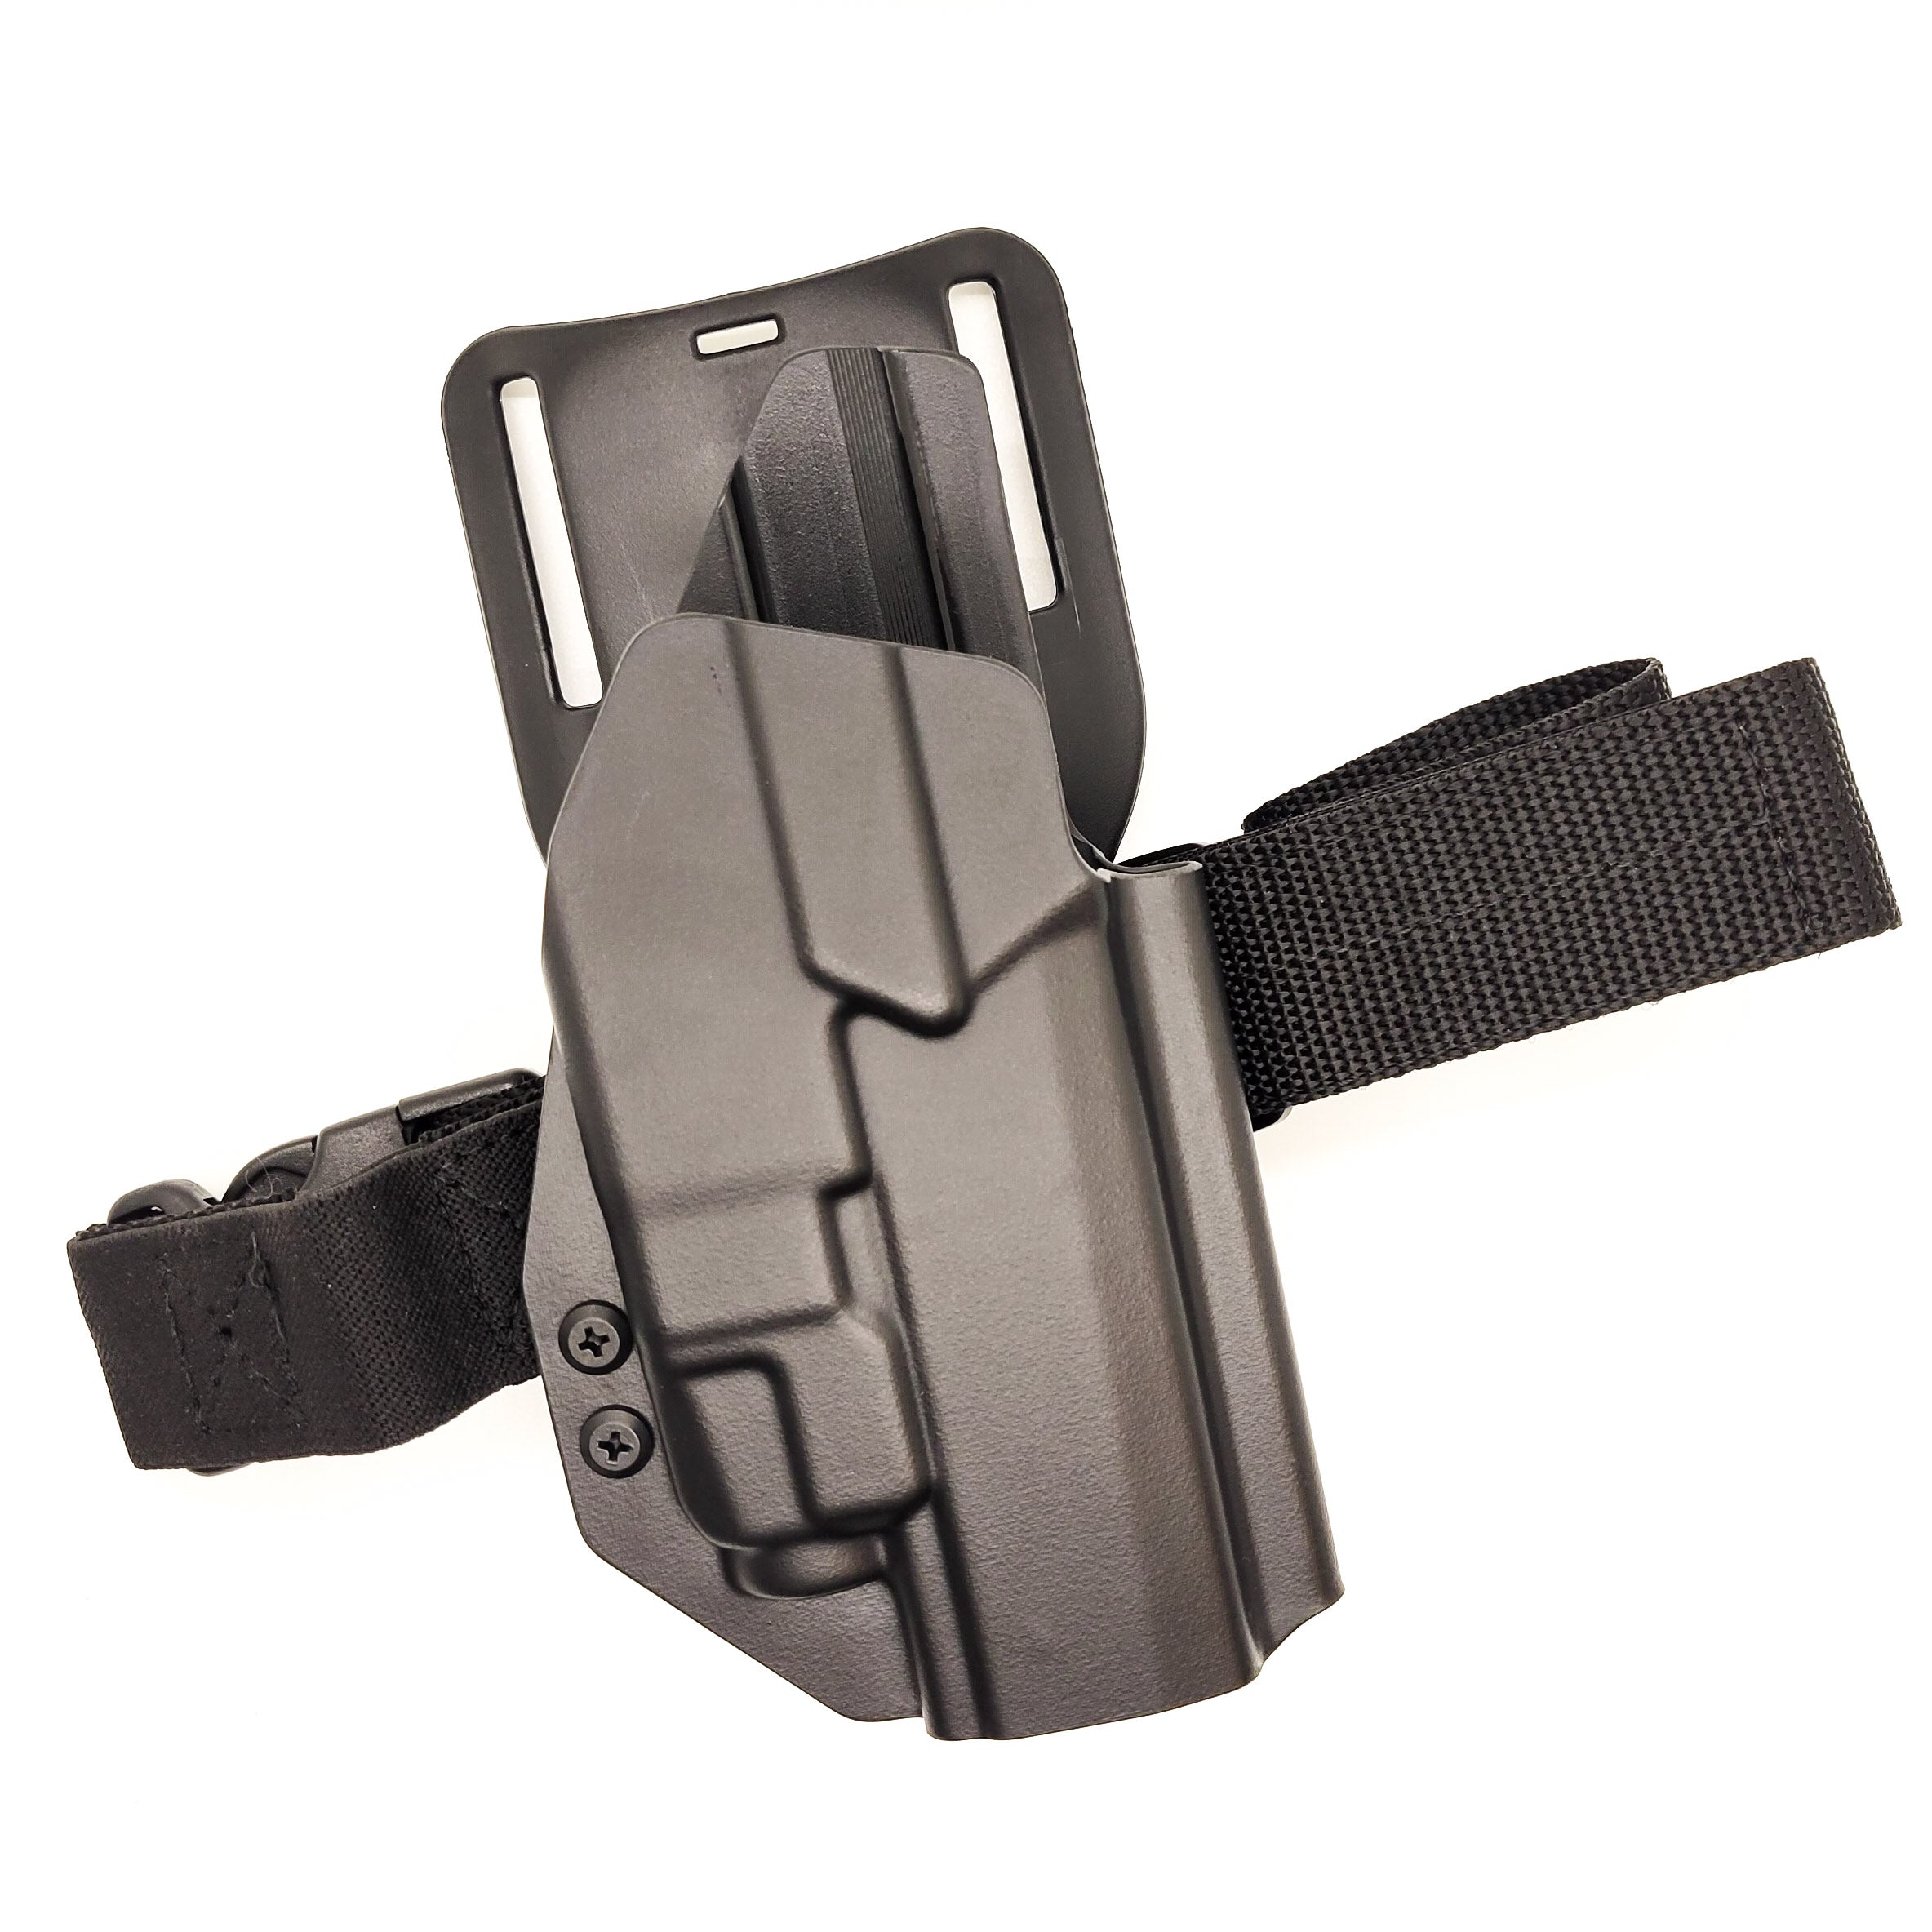 Outside Waistband Holster designed to fit the Full Size and Carry P320 series with Streamlight TLR-7 and TLR-7A weapon mounted light and GoGuns USA Gas Pedal Holster will accommodate the M17, M18 and X-Five models as well as the Carry and Compact using our competition belt mounting options.   The holster retention is on the light itself, this holster will NOT work without the TLR-7 or TLR-7A light attached to the firearm.